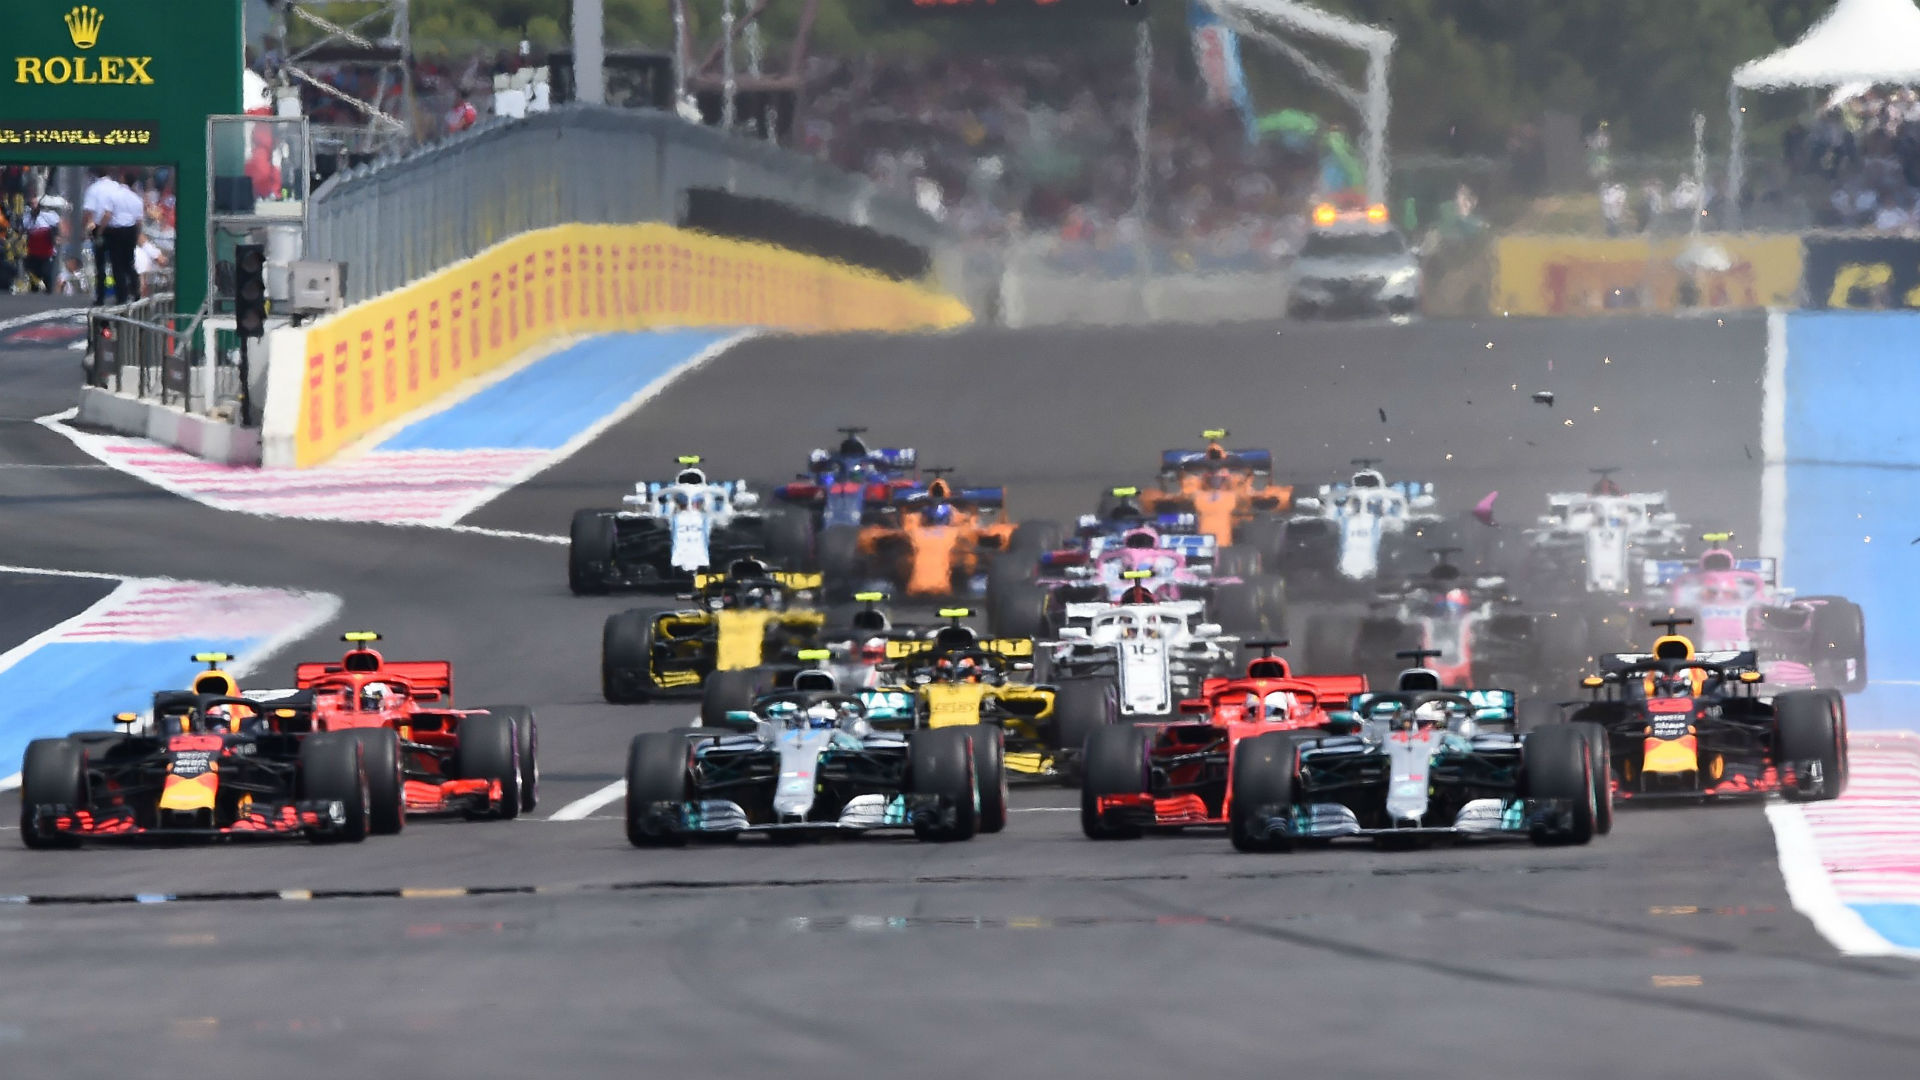 F1 French Grand Prix: Start time, TV channel, how to stream 2019 race